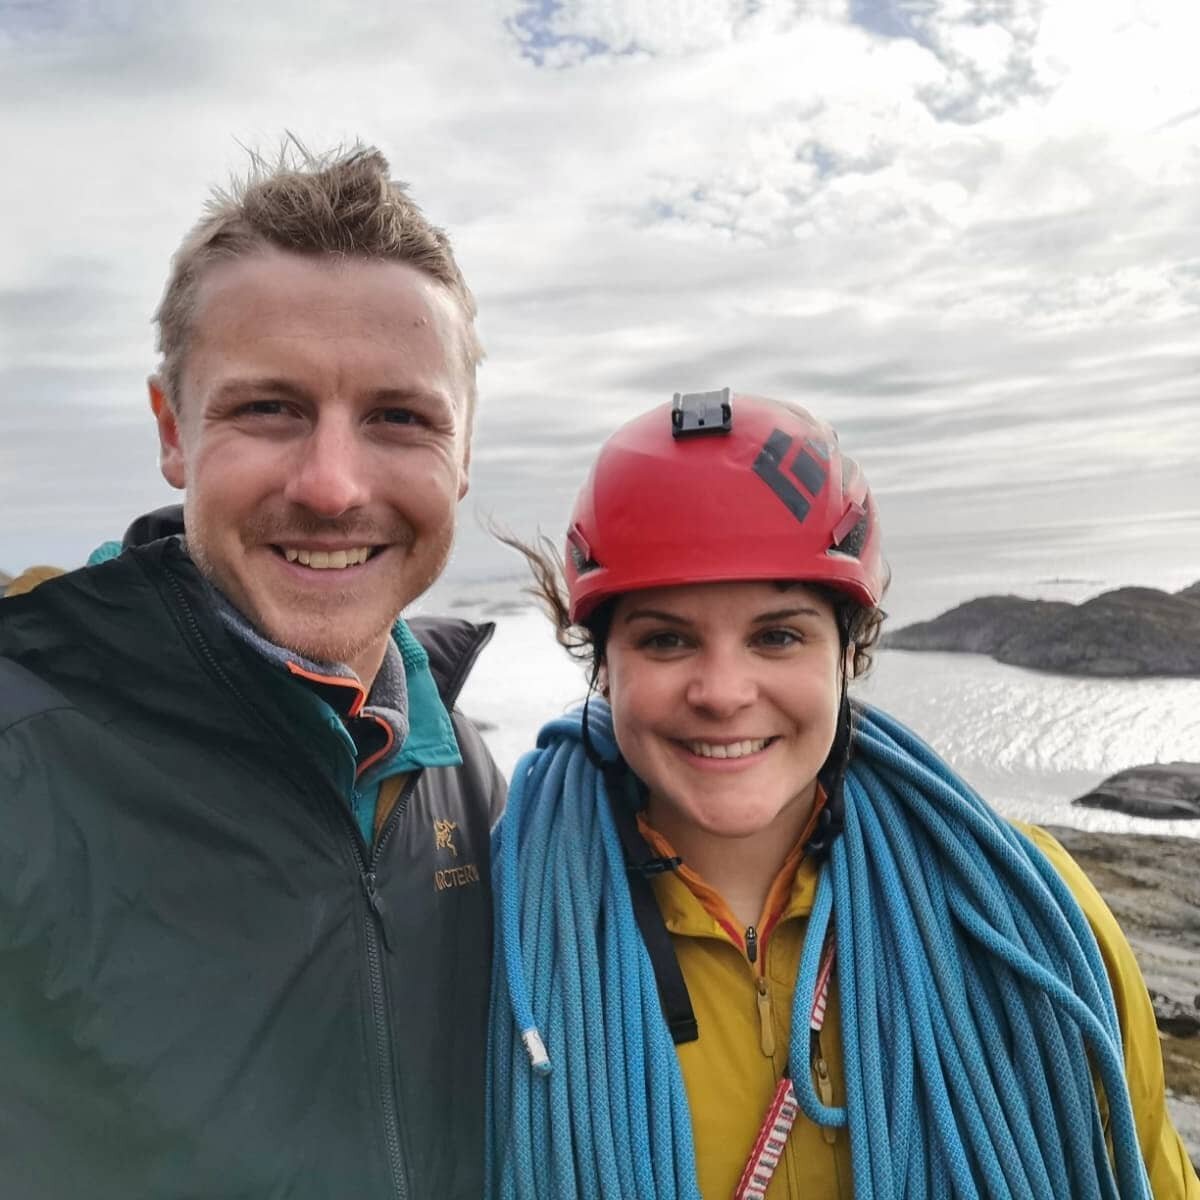 What a start to the climbing season! Big thanks to @marianadventures for sharing a great week in Lofoten, climbing far more than anticipated and returning to Troms&oslash; with big smiles and sore hands 😅🙏.

Can't wait for more climbing with this o